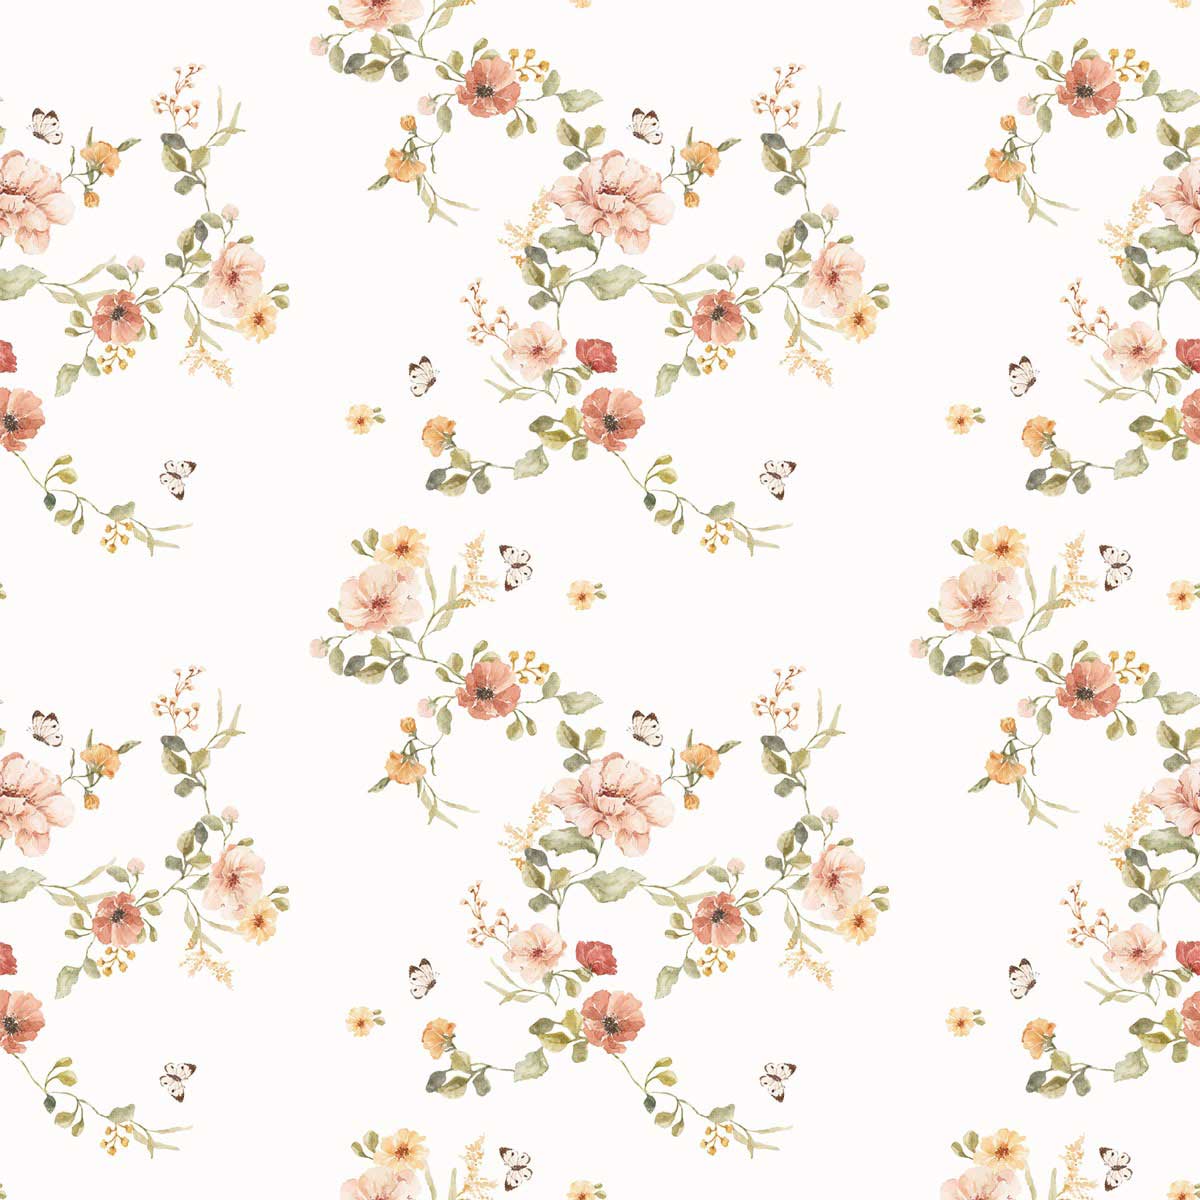 Floral Vintage Wallpaper.com Wallstickers And Wallpaper Online Store